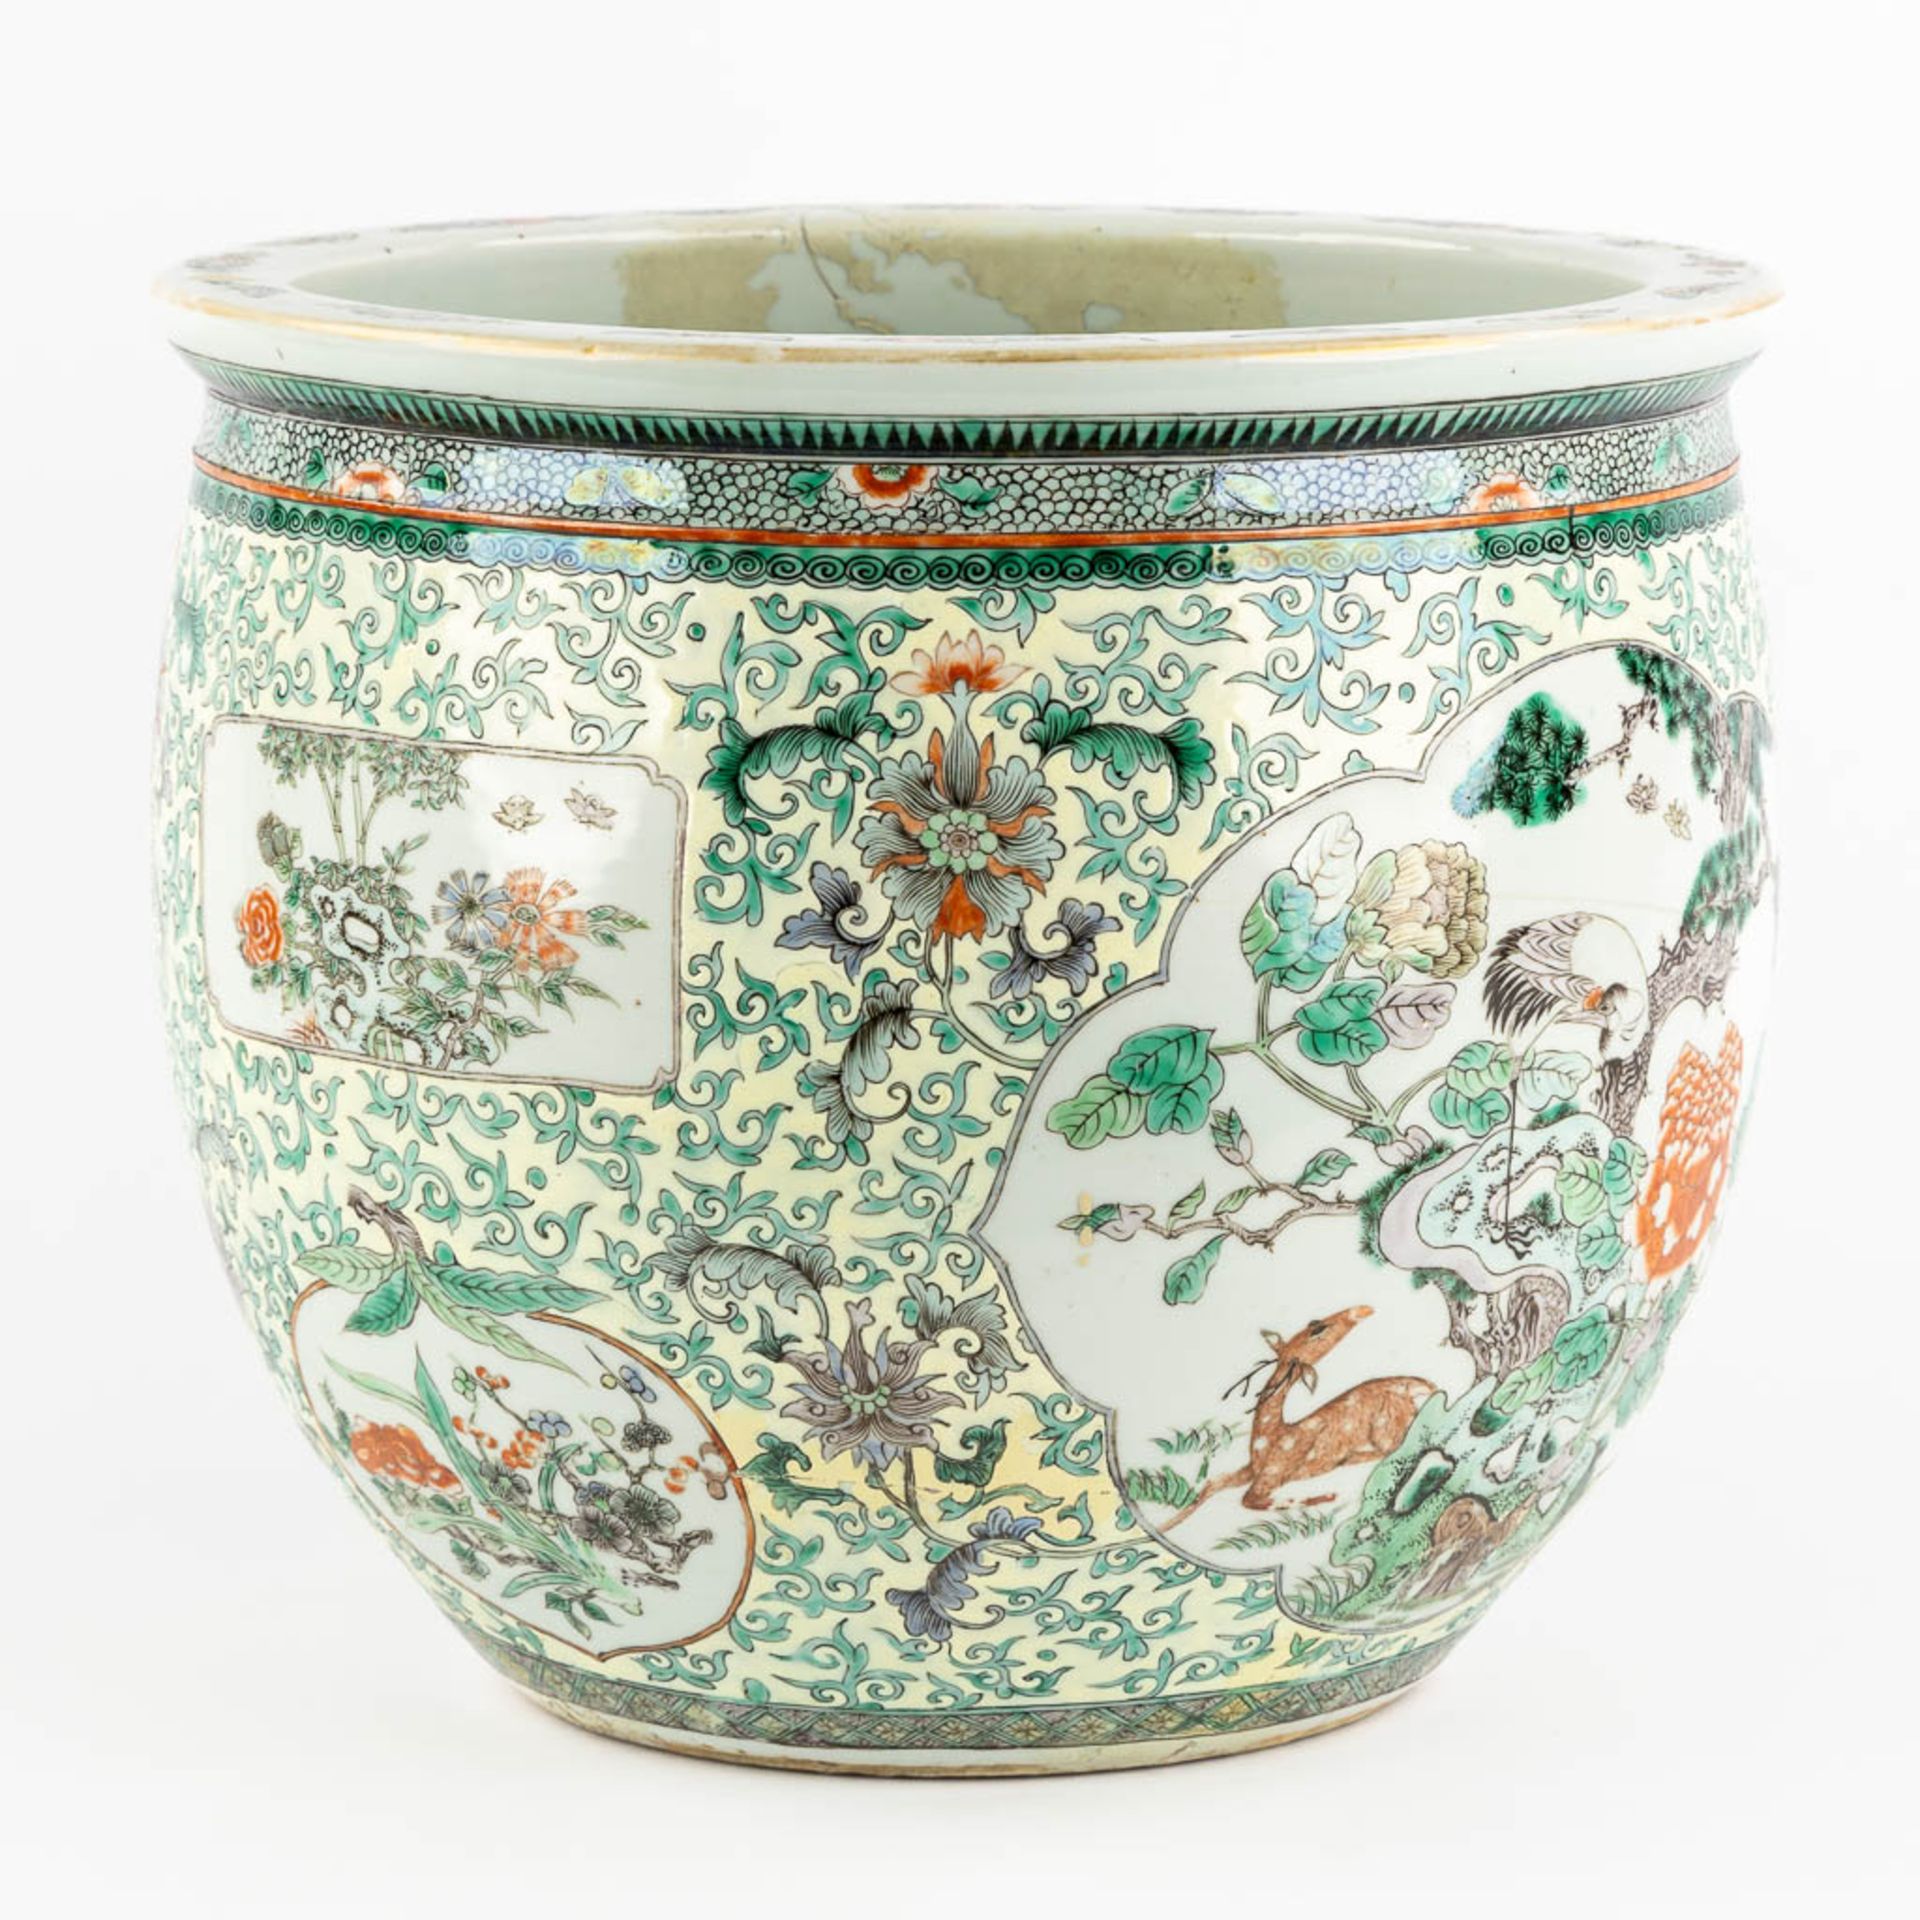 A Large Chinese Cache-Pot, Famille Verte decorated with fauna and flora. 19th C. (H:35 x D:40 cm) - Bild 5 aus 14